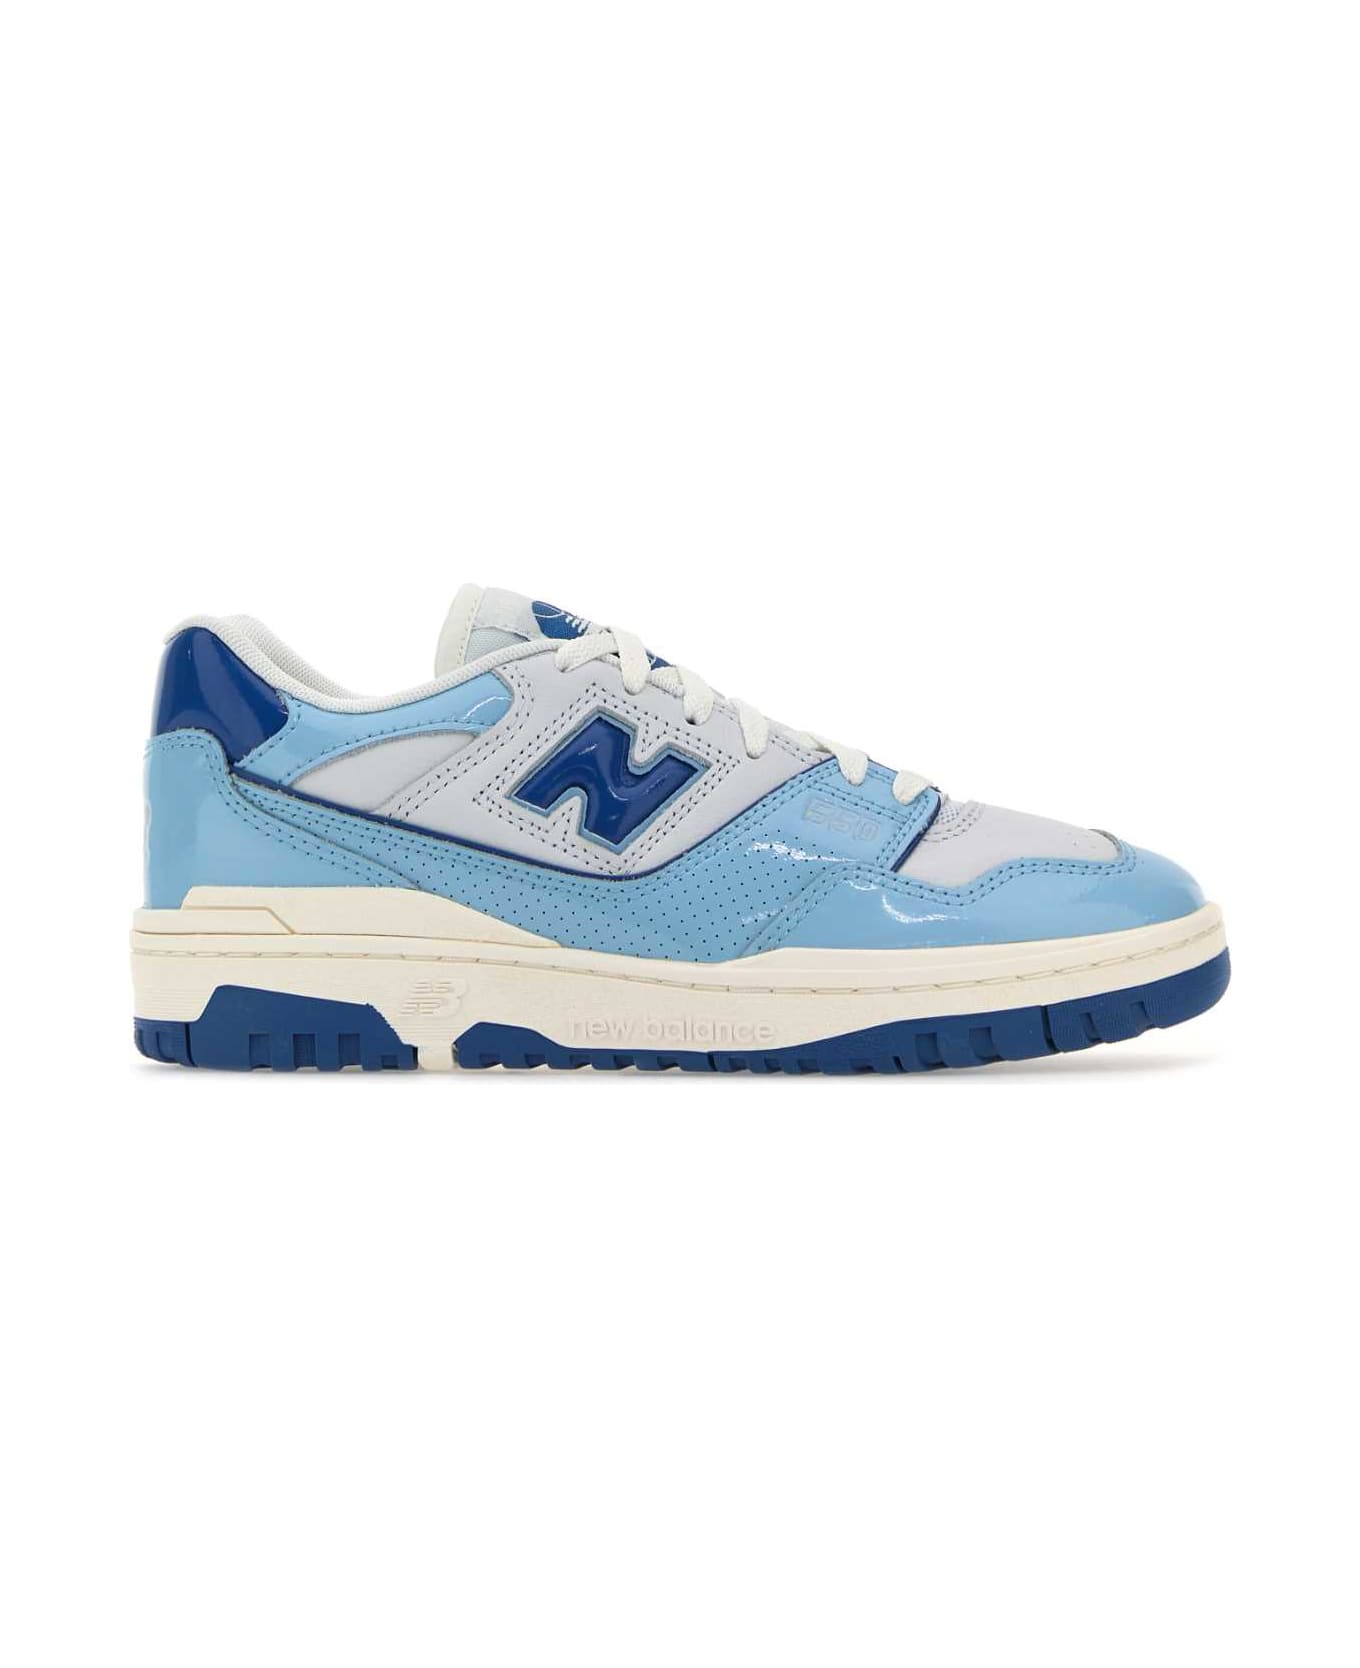 New Balance Multicolor Leather 550 Sneakers - CHROMEBLUE